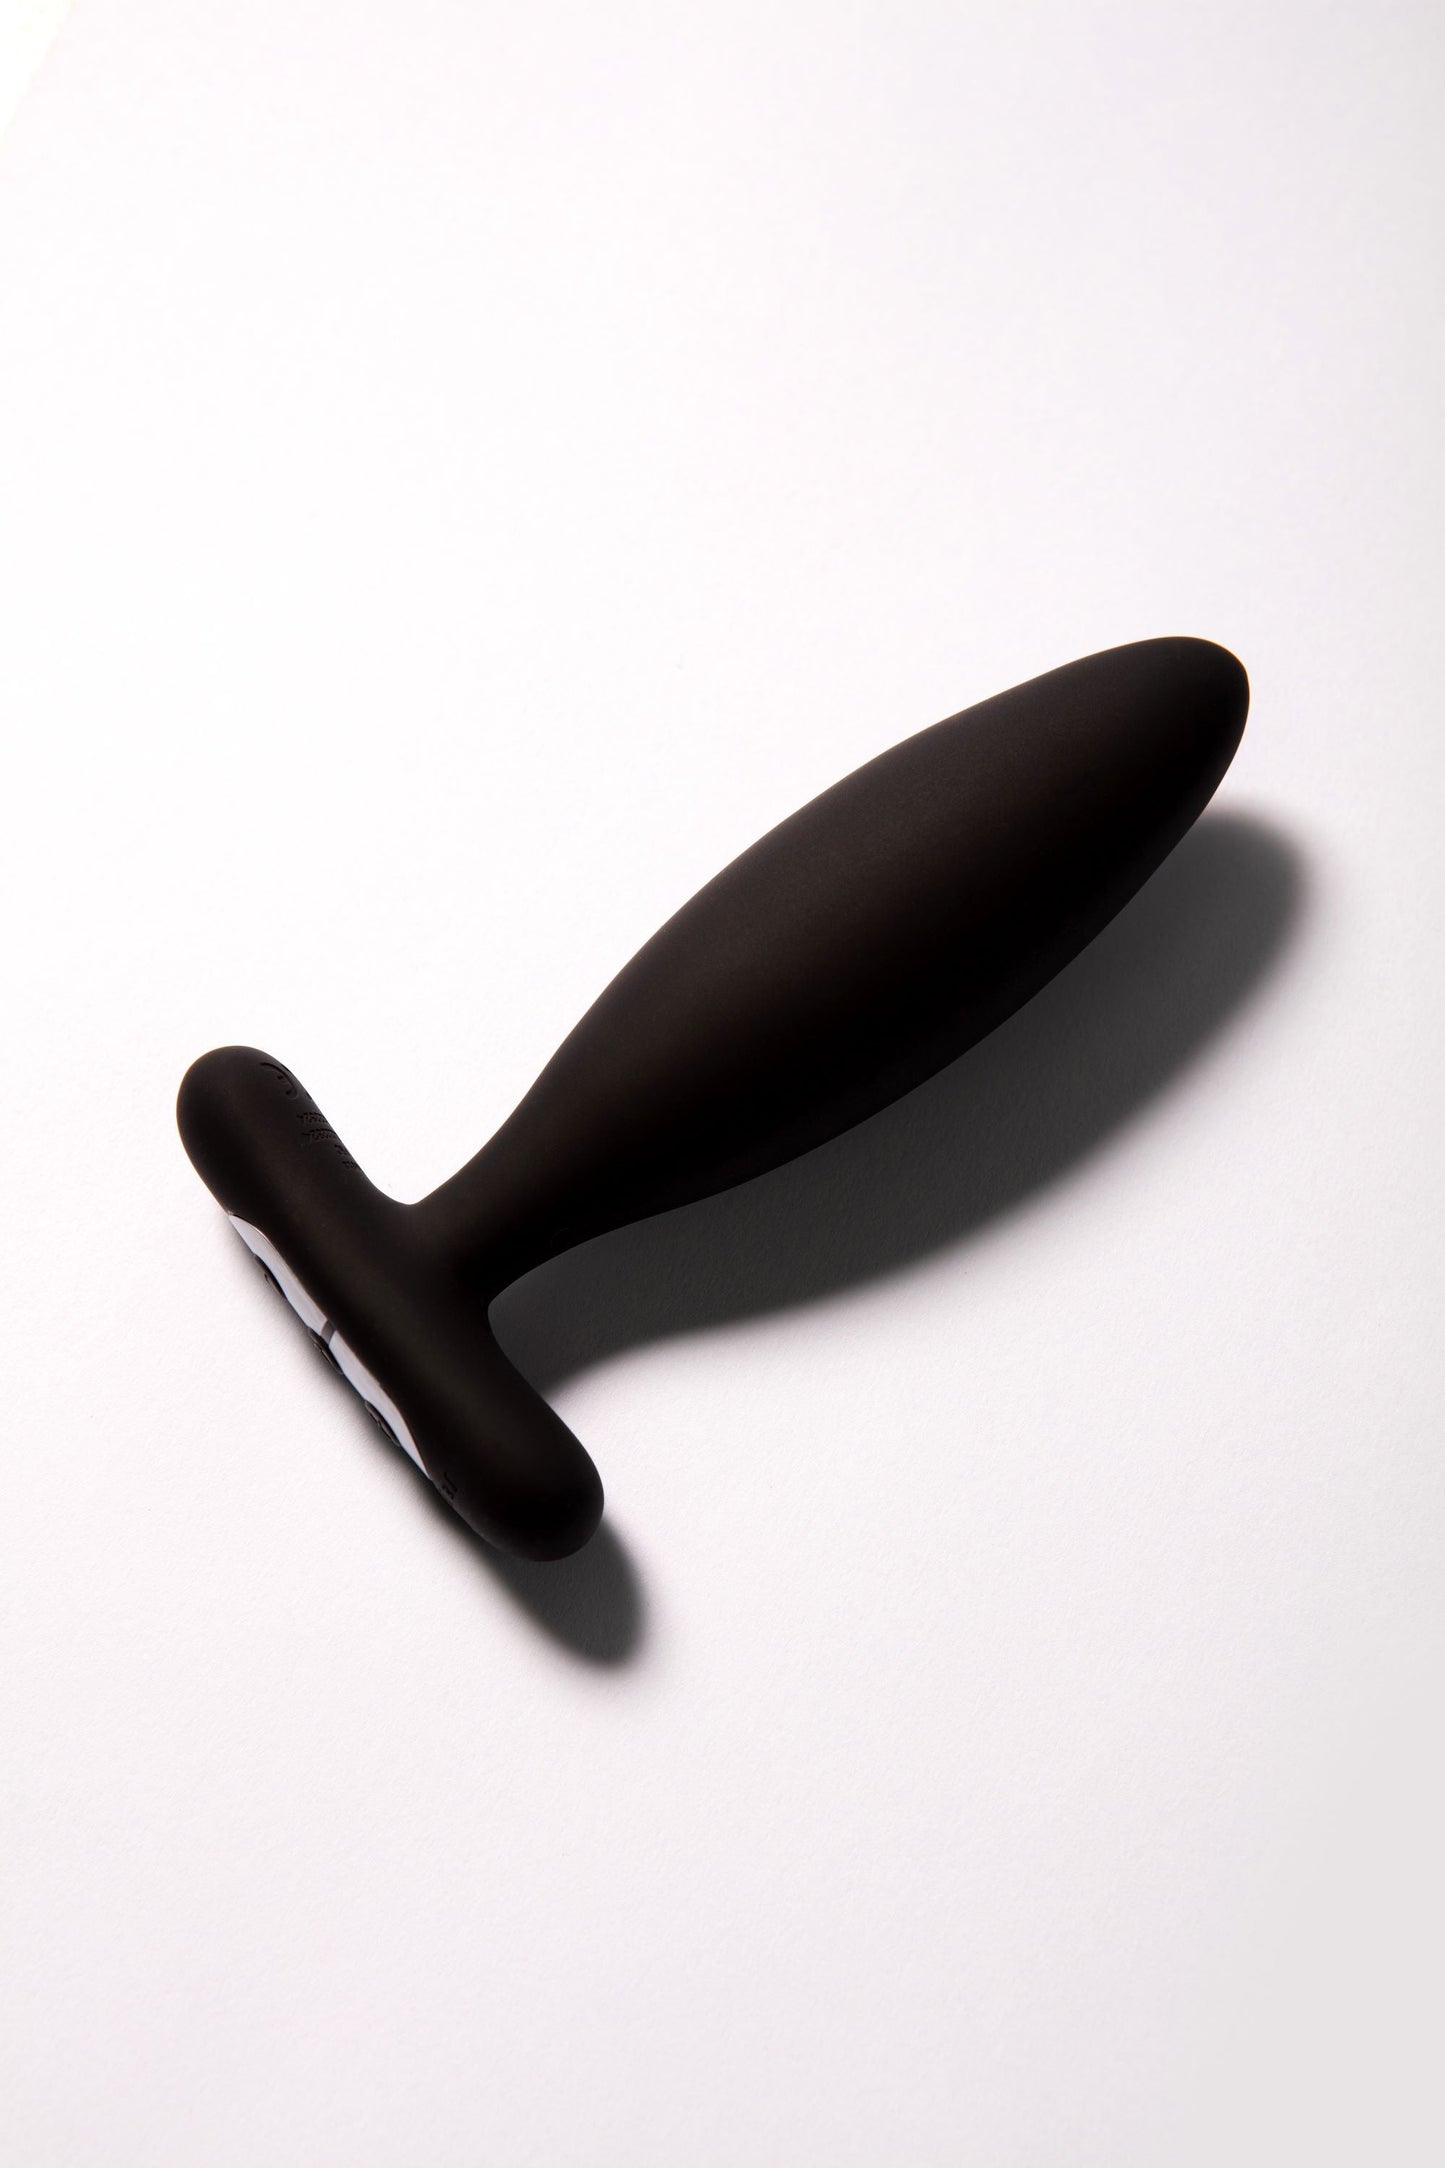 Vesta Vibrating Butt Plug - Rumbly Vibes - Ideal for Beginners